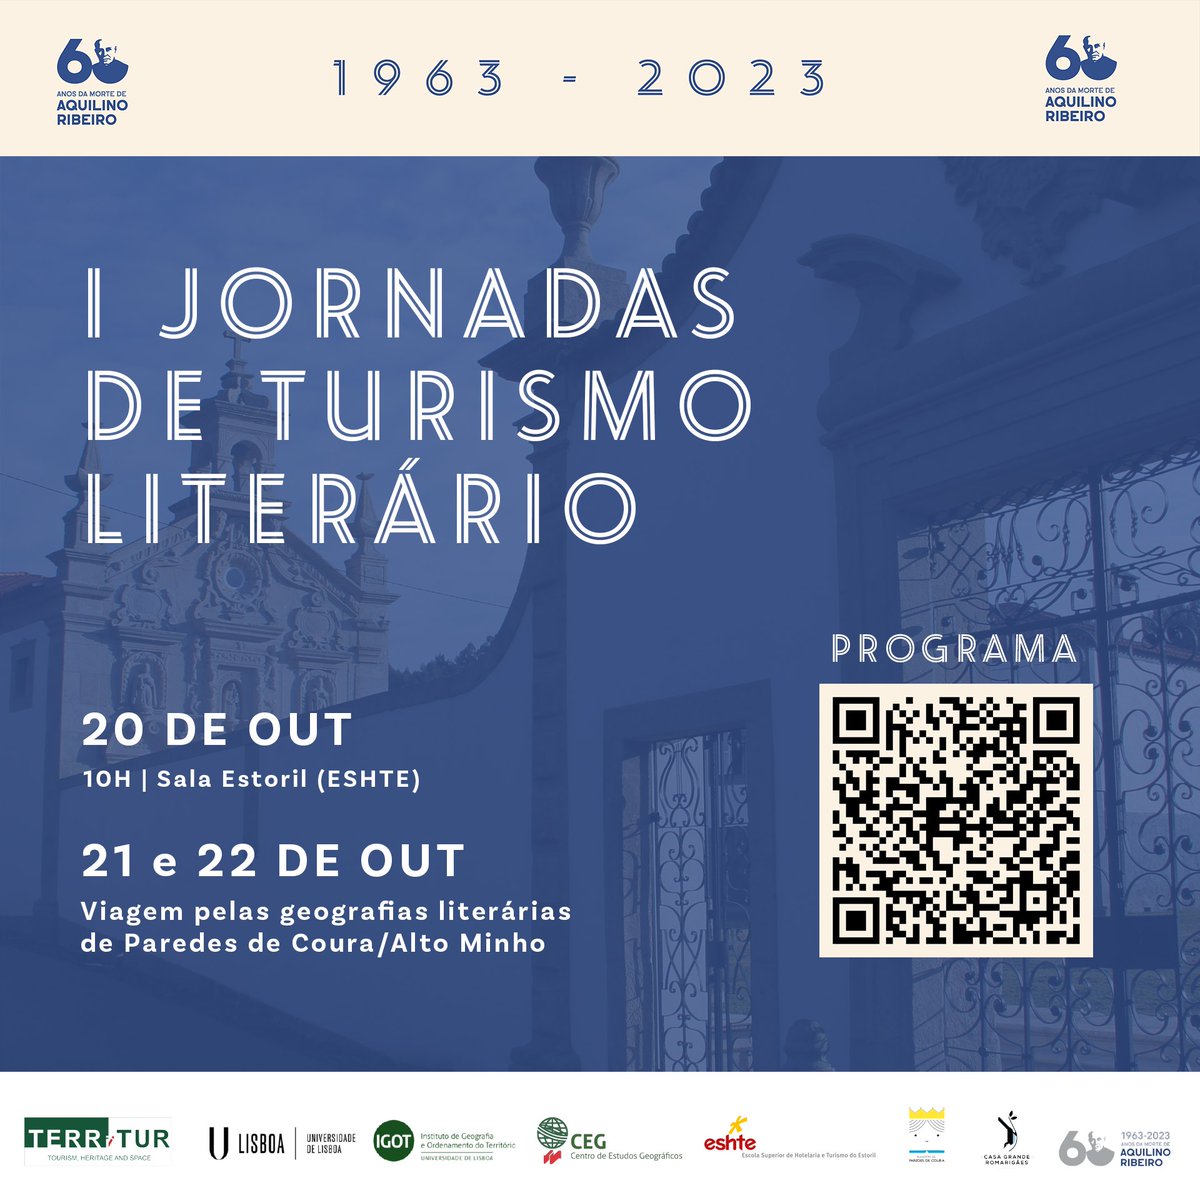 🔈SAVE THE DATE!
First Literary Tourism Symposium | 'Literary Tourism in Aquilino's Landscapes'

📅 20/10 at ESHTE | 21 and 22/10 Alto Minho Route
📌 For registration and more information visit: tinyurl.com/mrxcv2n3

#igot #eshte #literarytourism #aquilinoribeiro #SaveTheDate